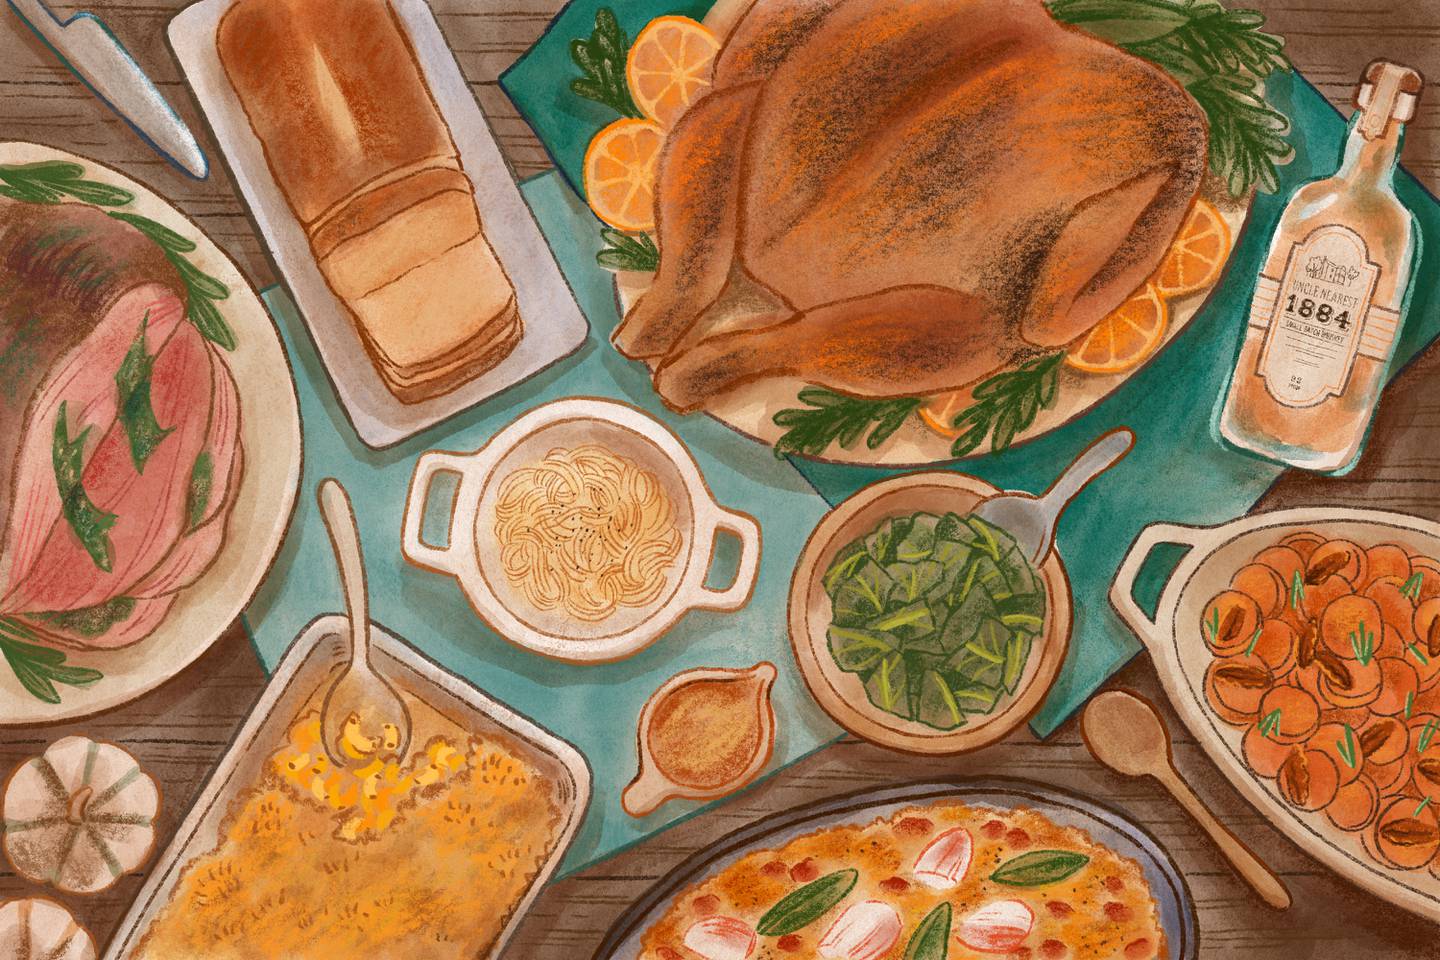 Illustration of food items set on a holiday table.